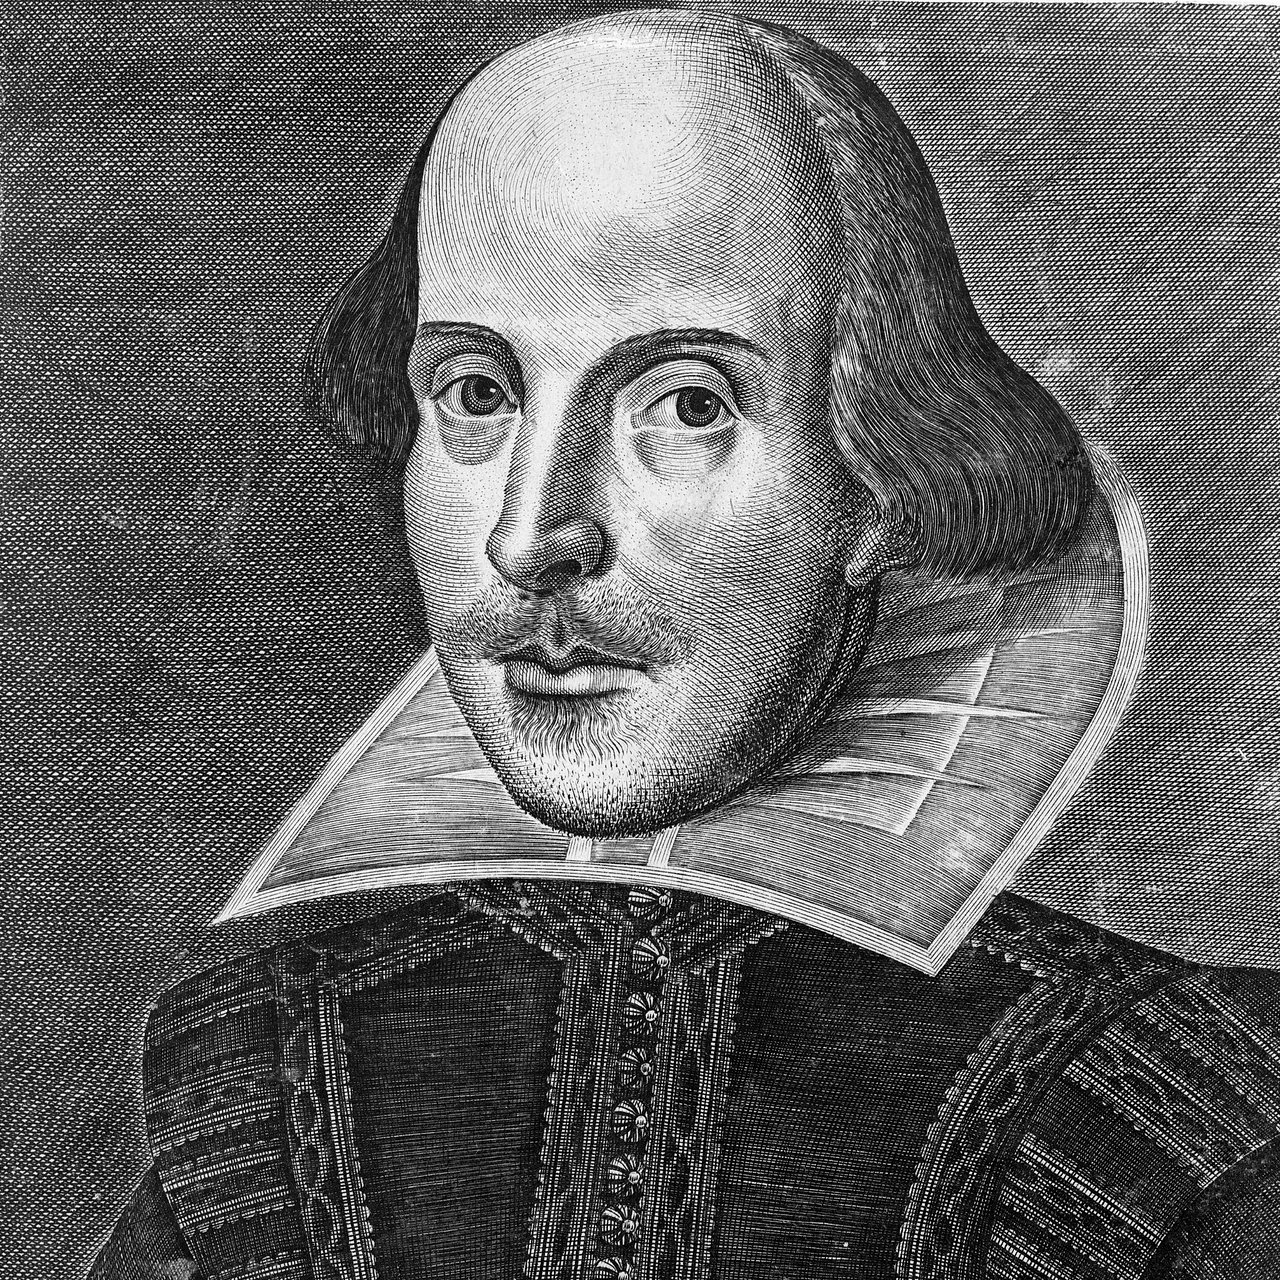 Martin Droeshout’s 1623 engraving of Shakespeare